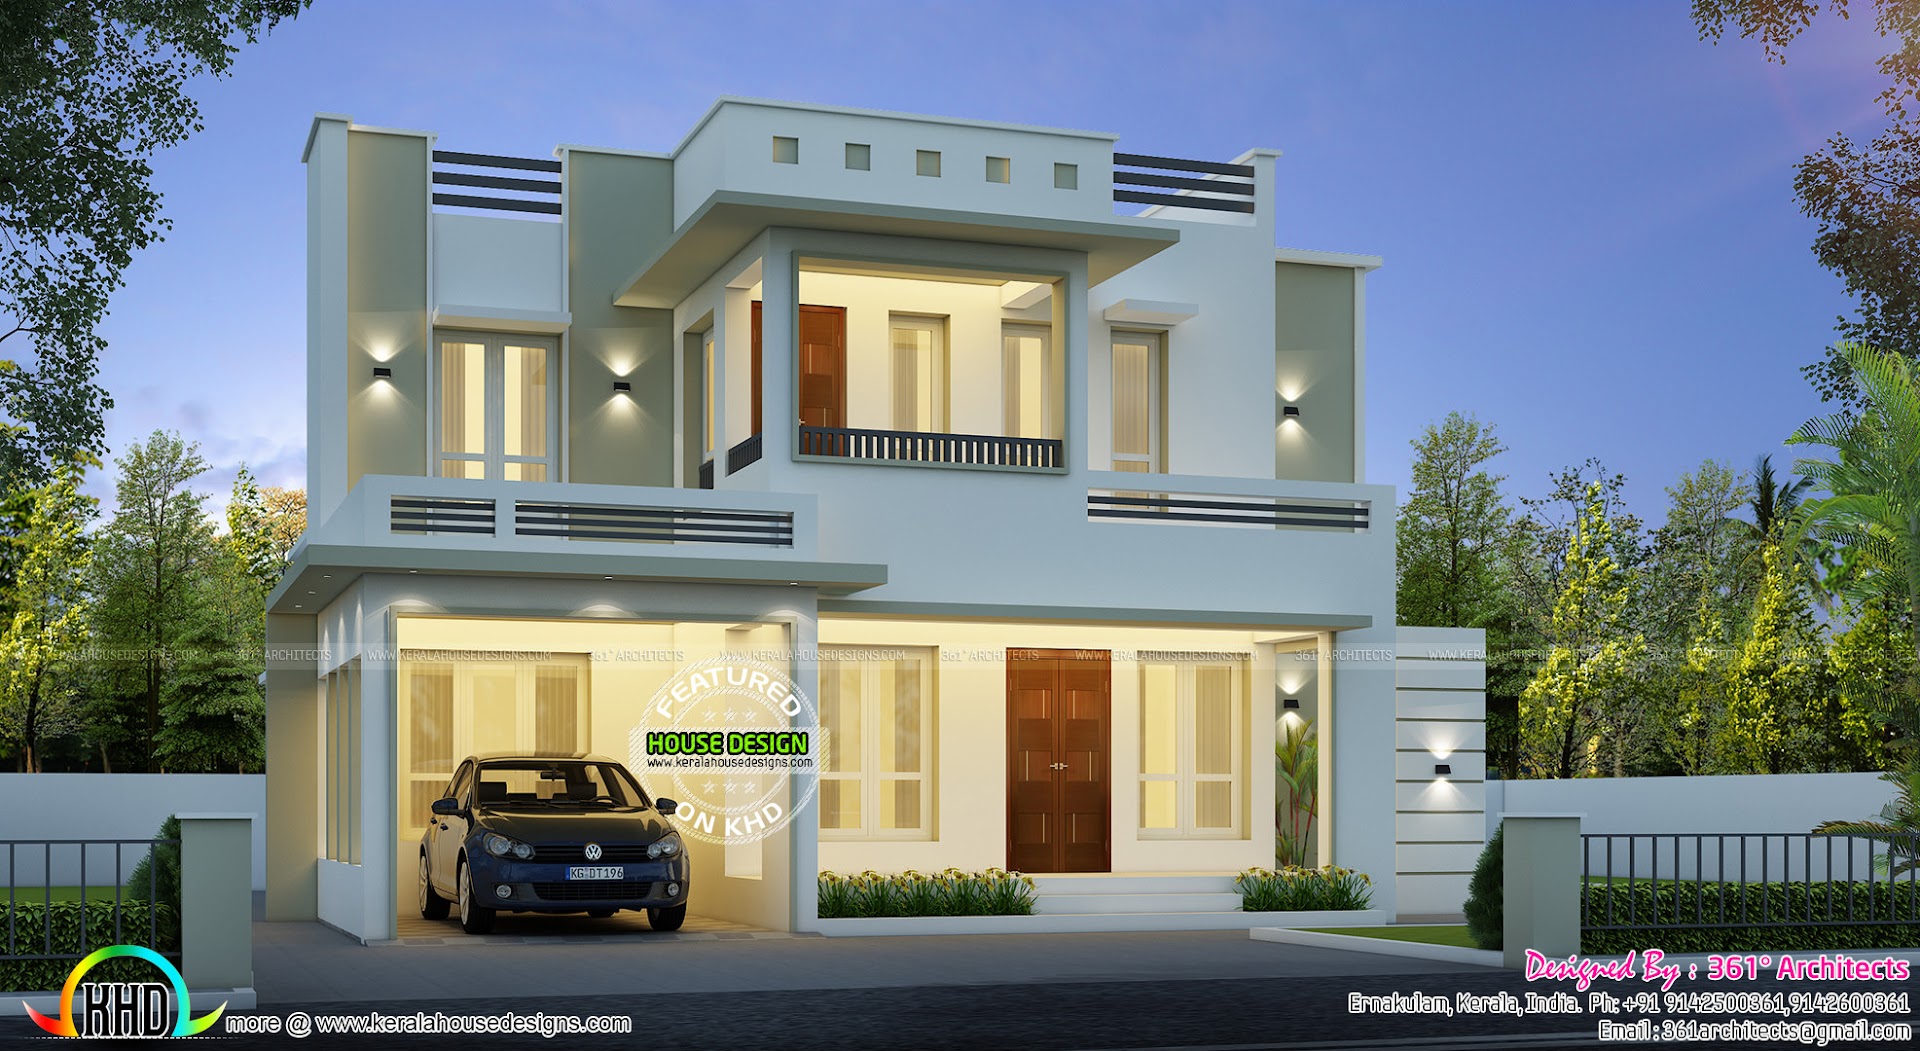  Awesome  28 lakhs house  Kerala home  design  and floor 